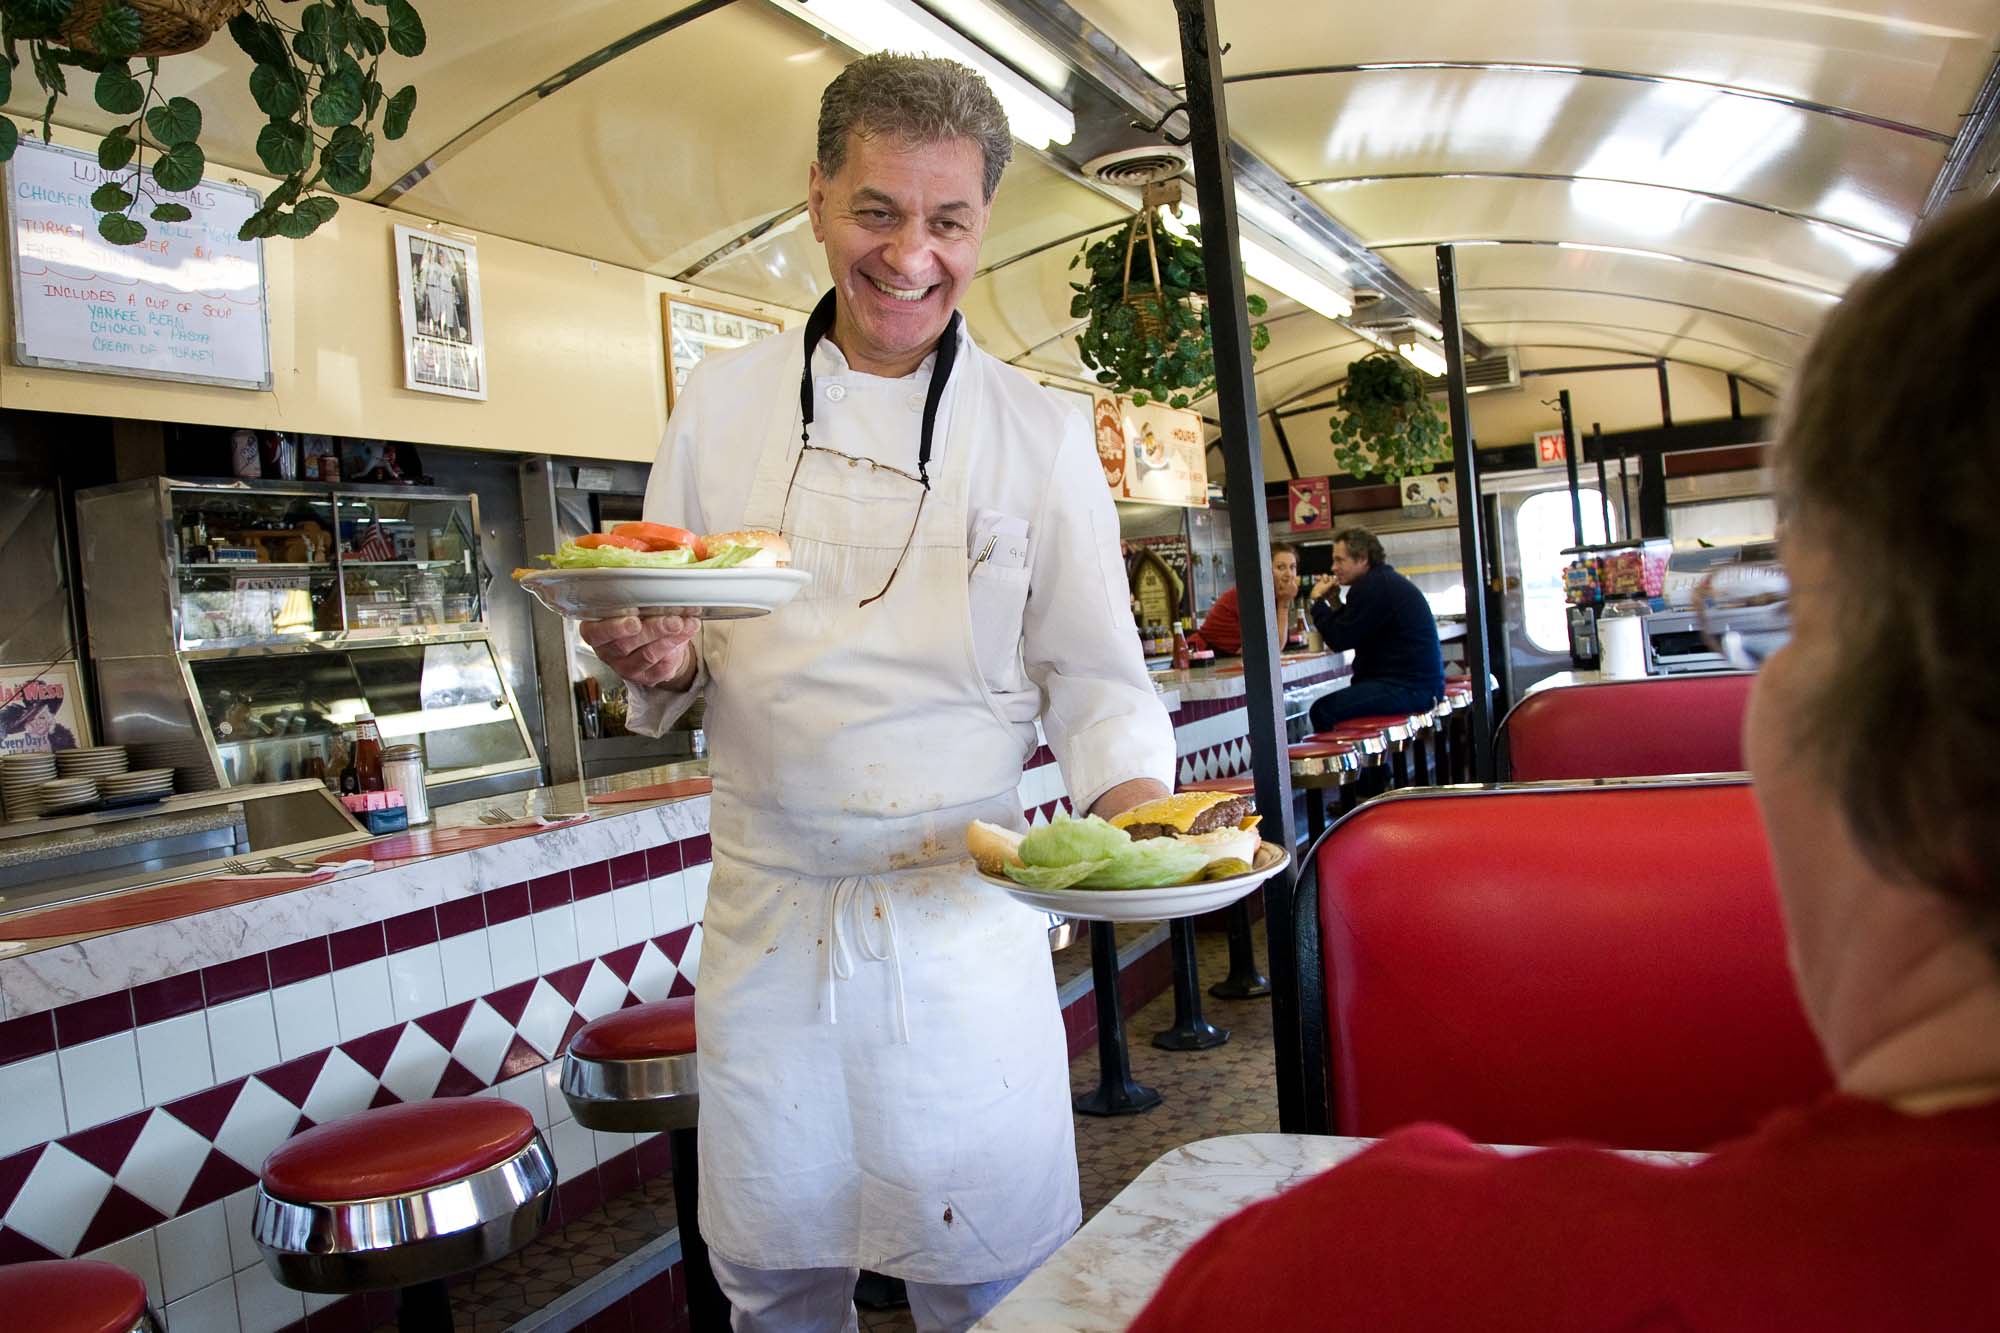 Senior citizen working in his diner, staying engaged in his community